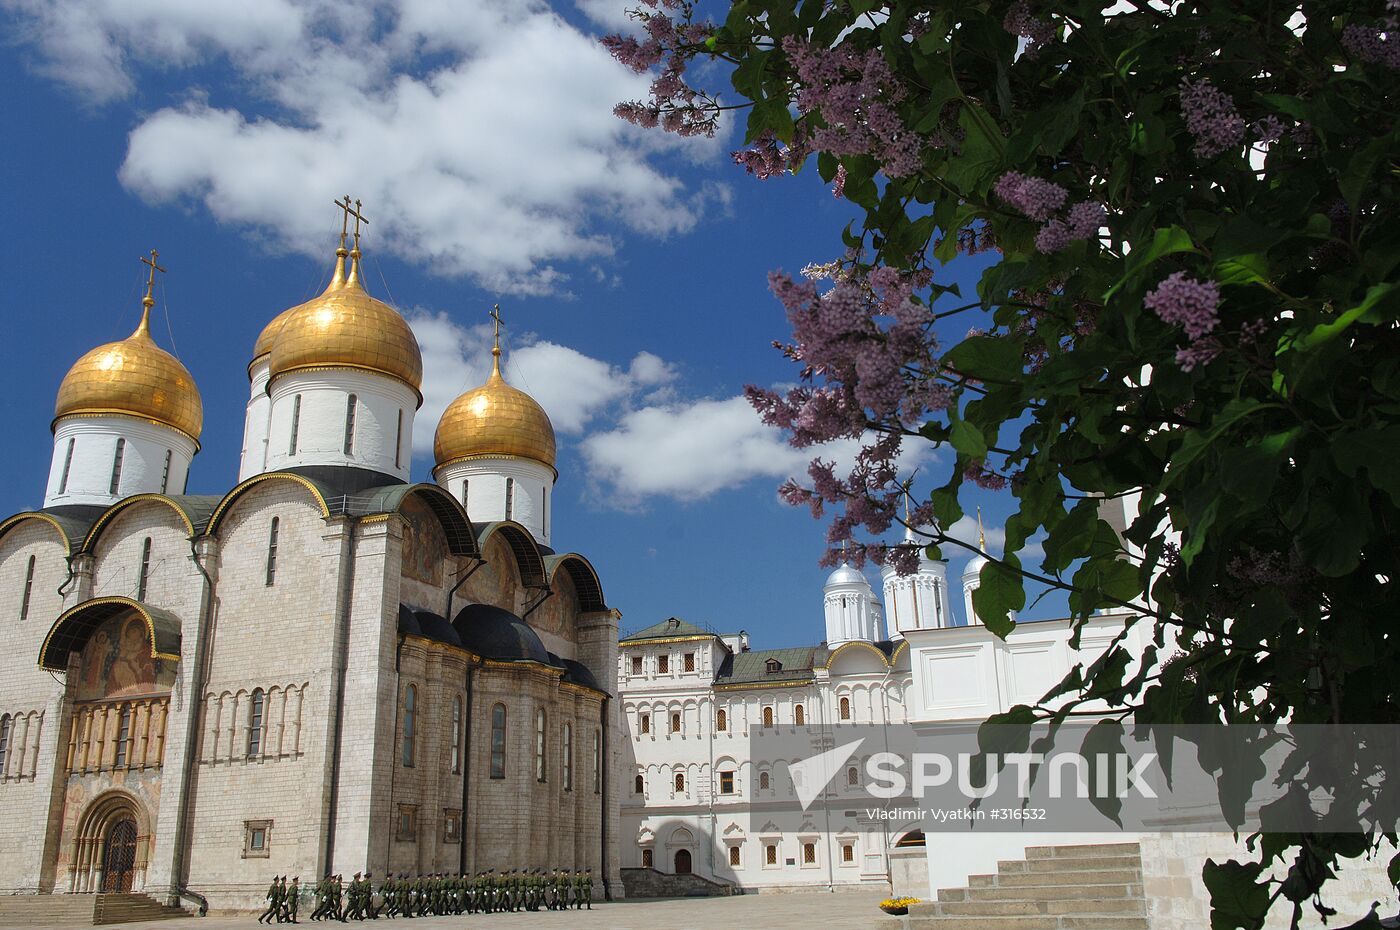 Cathedral square, the Moscow Kremlin